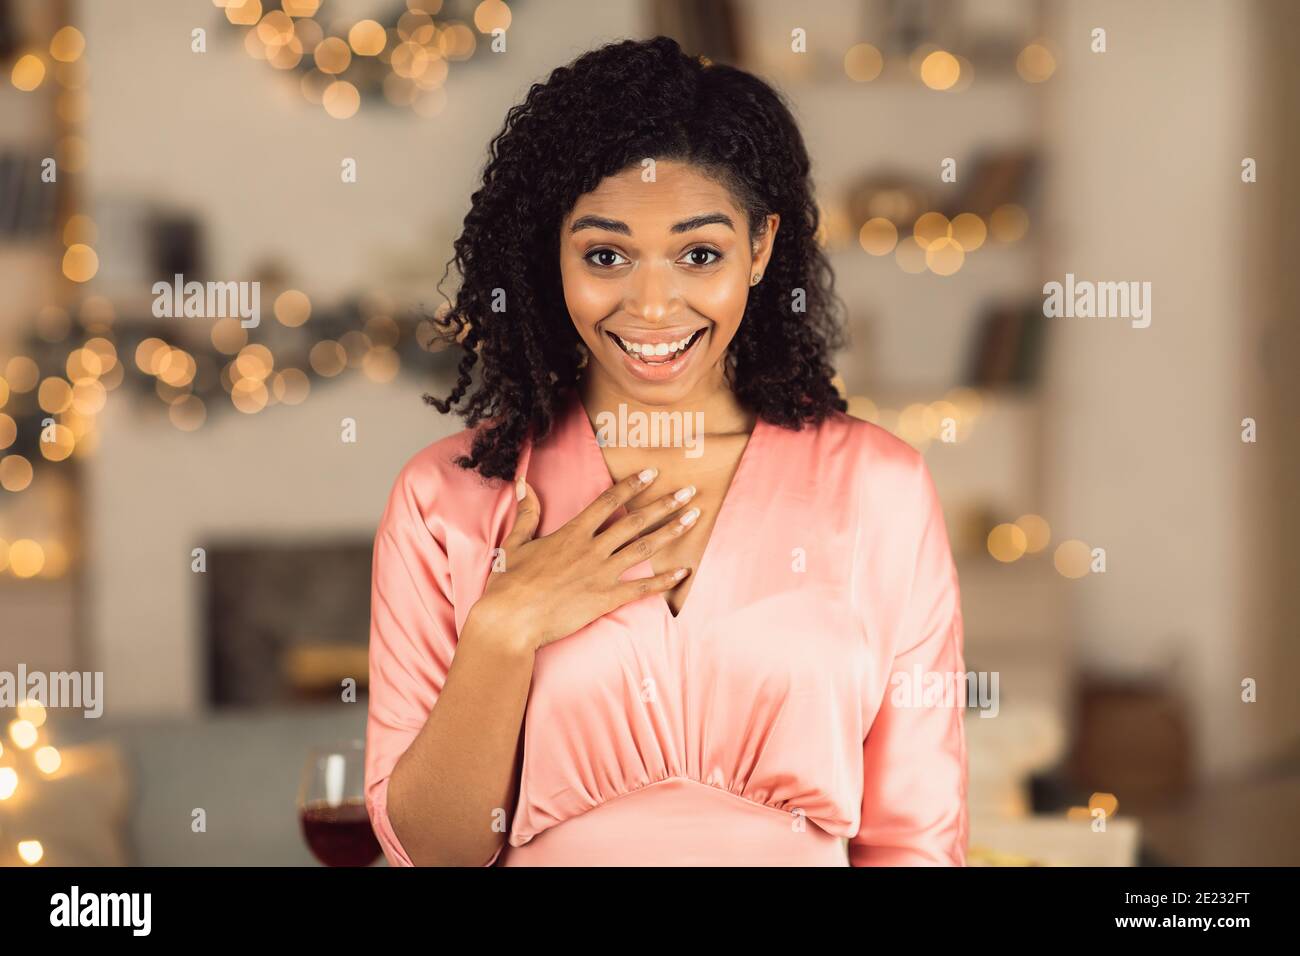 Surprised african american woman in dress touching chest and smiling Stock Photo